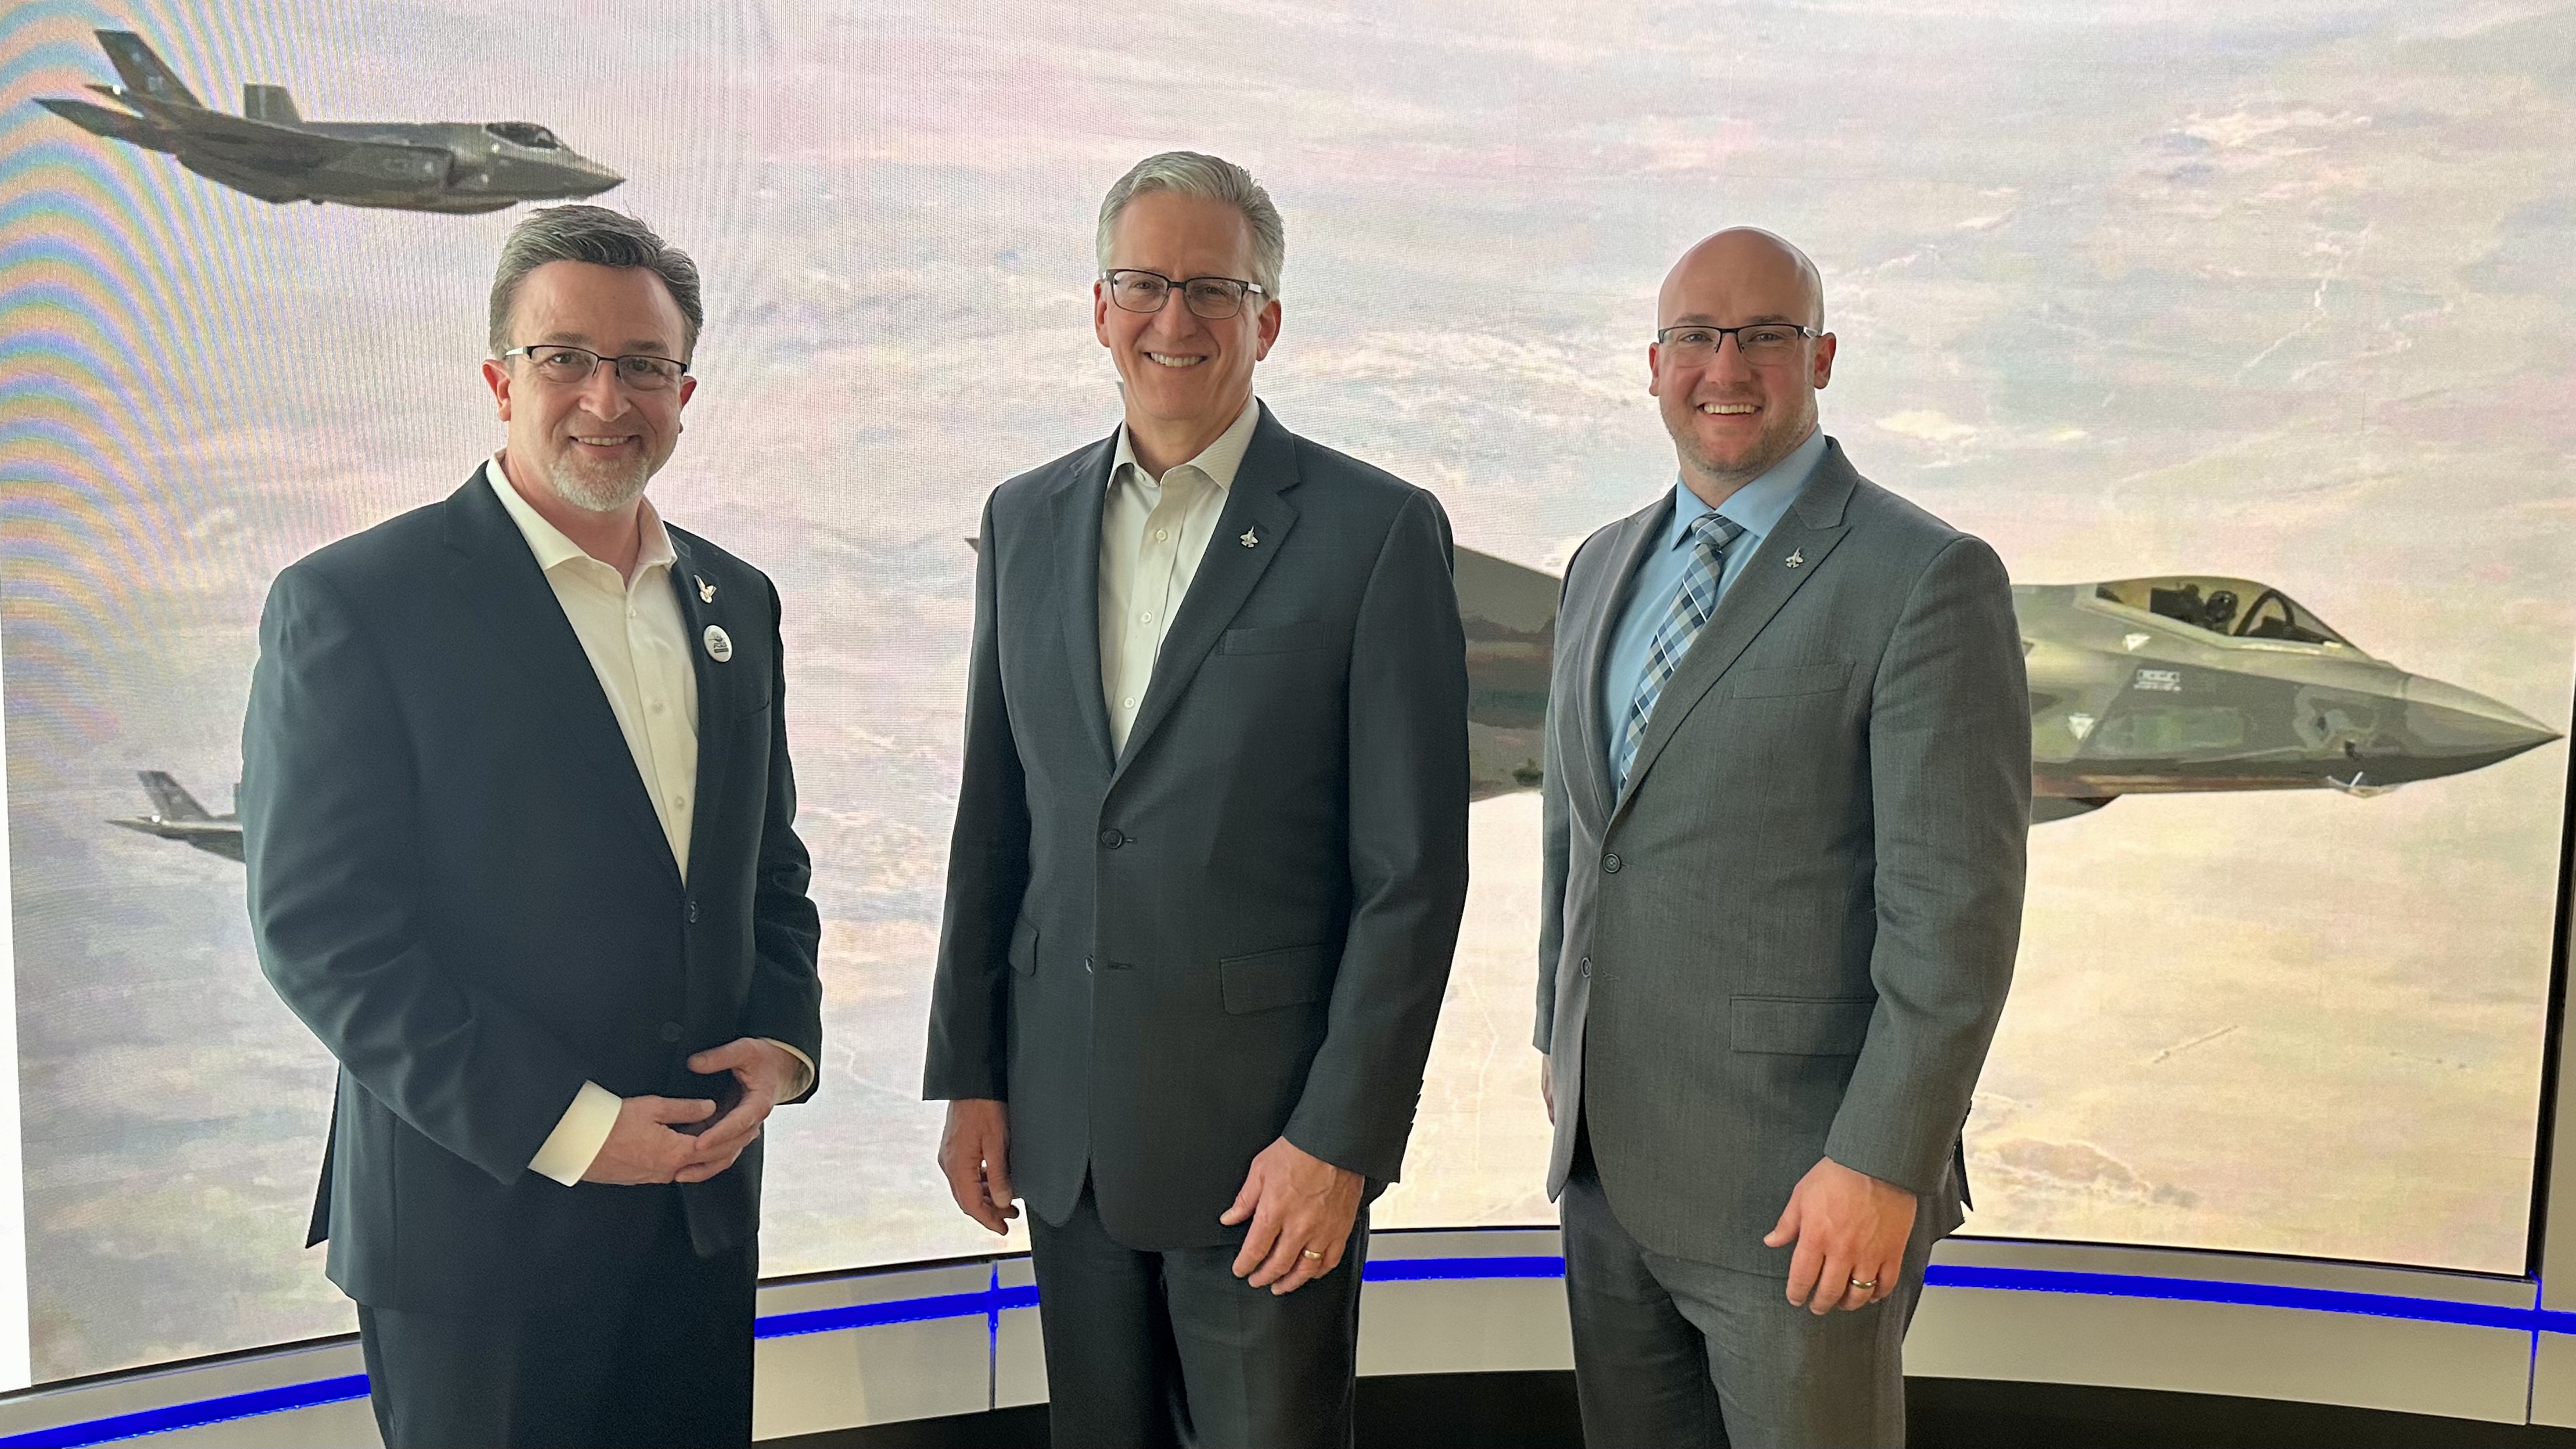 Tracy Solomon and Nate Witsaman from TEVET attend the F-35 Supplier Conference with Doug Wilhelm, Deputy and VP of the F-35 Program